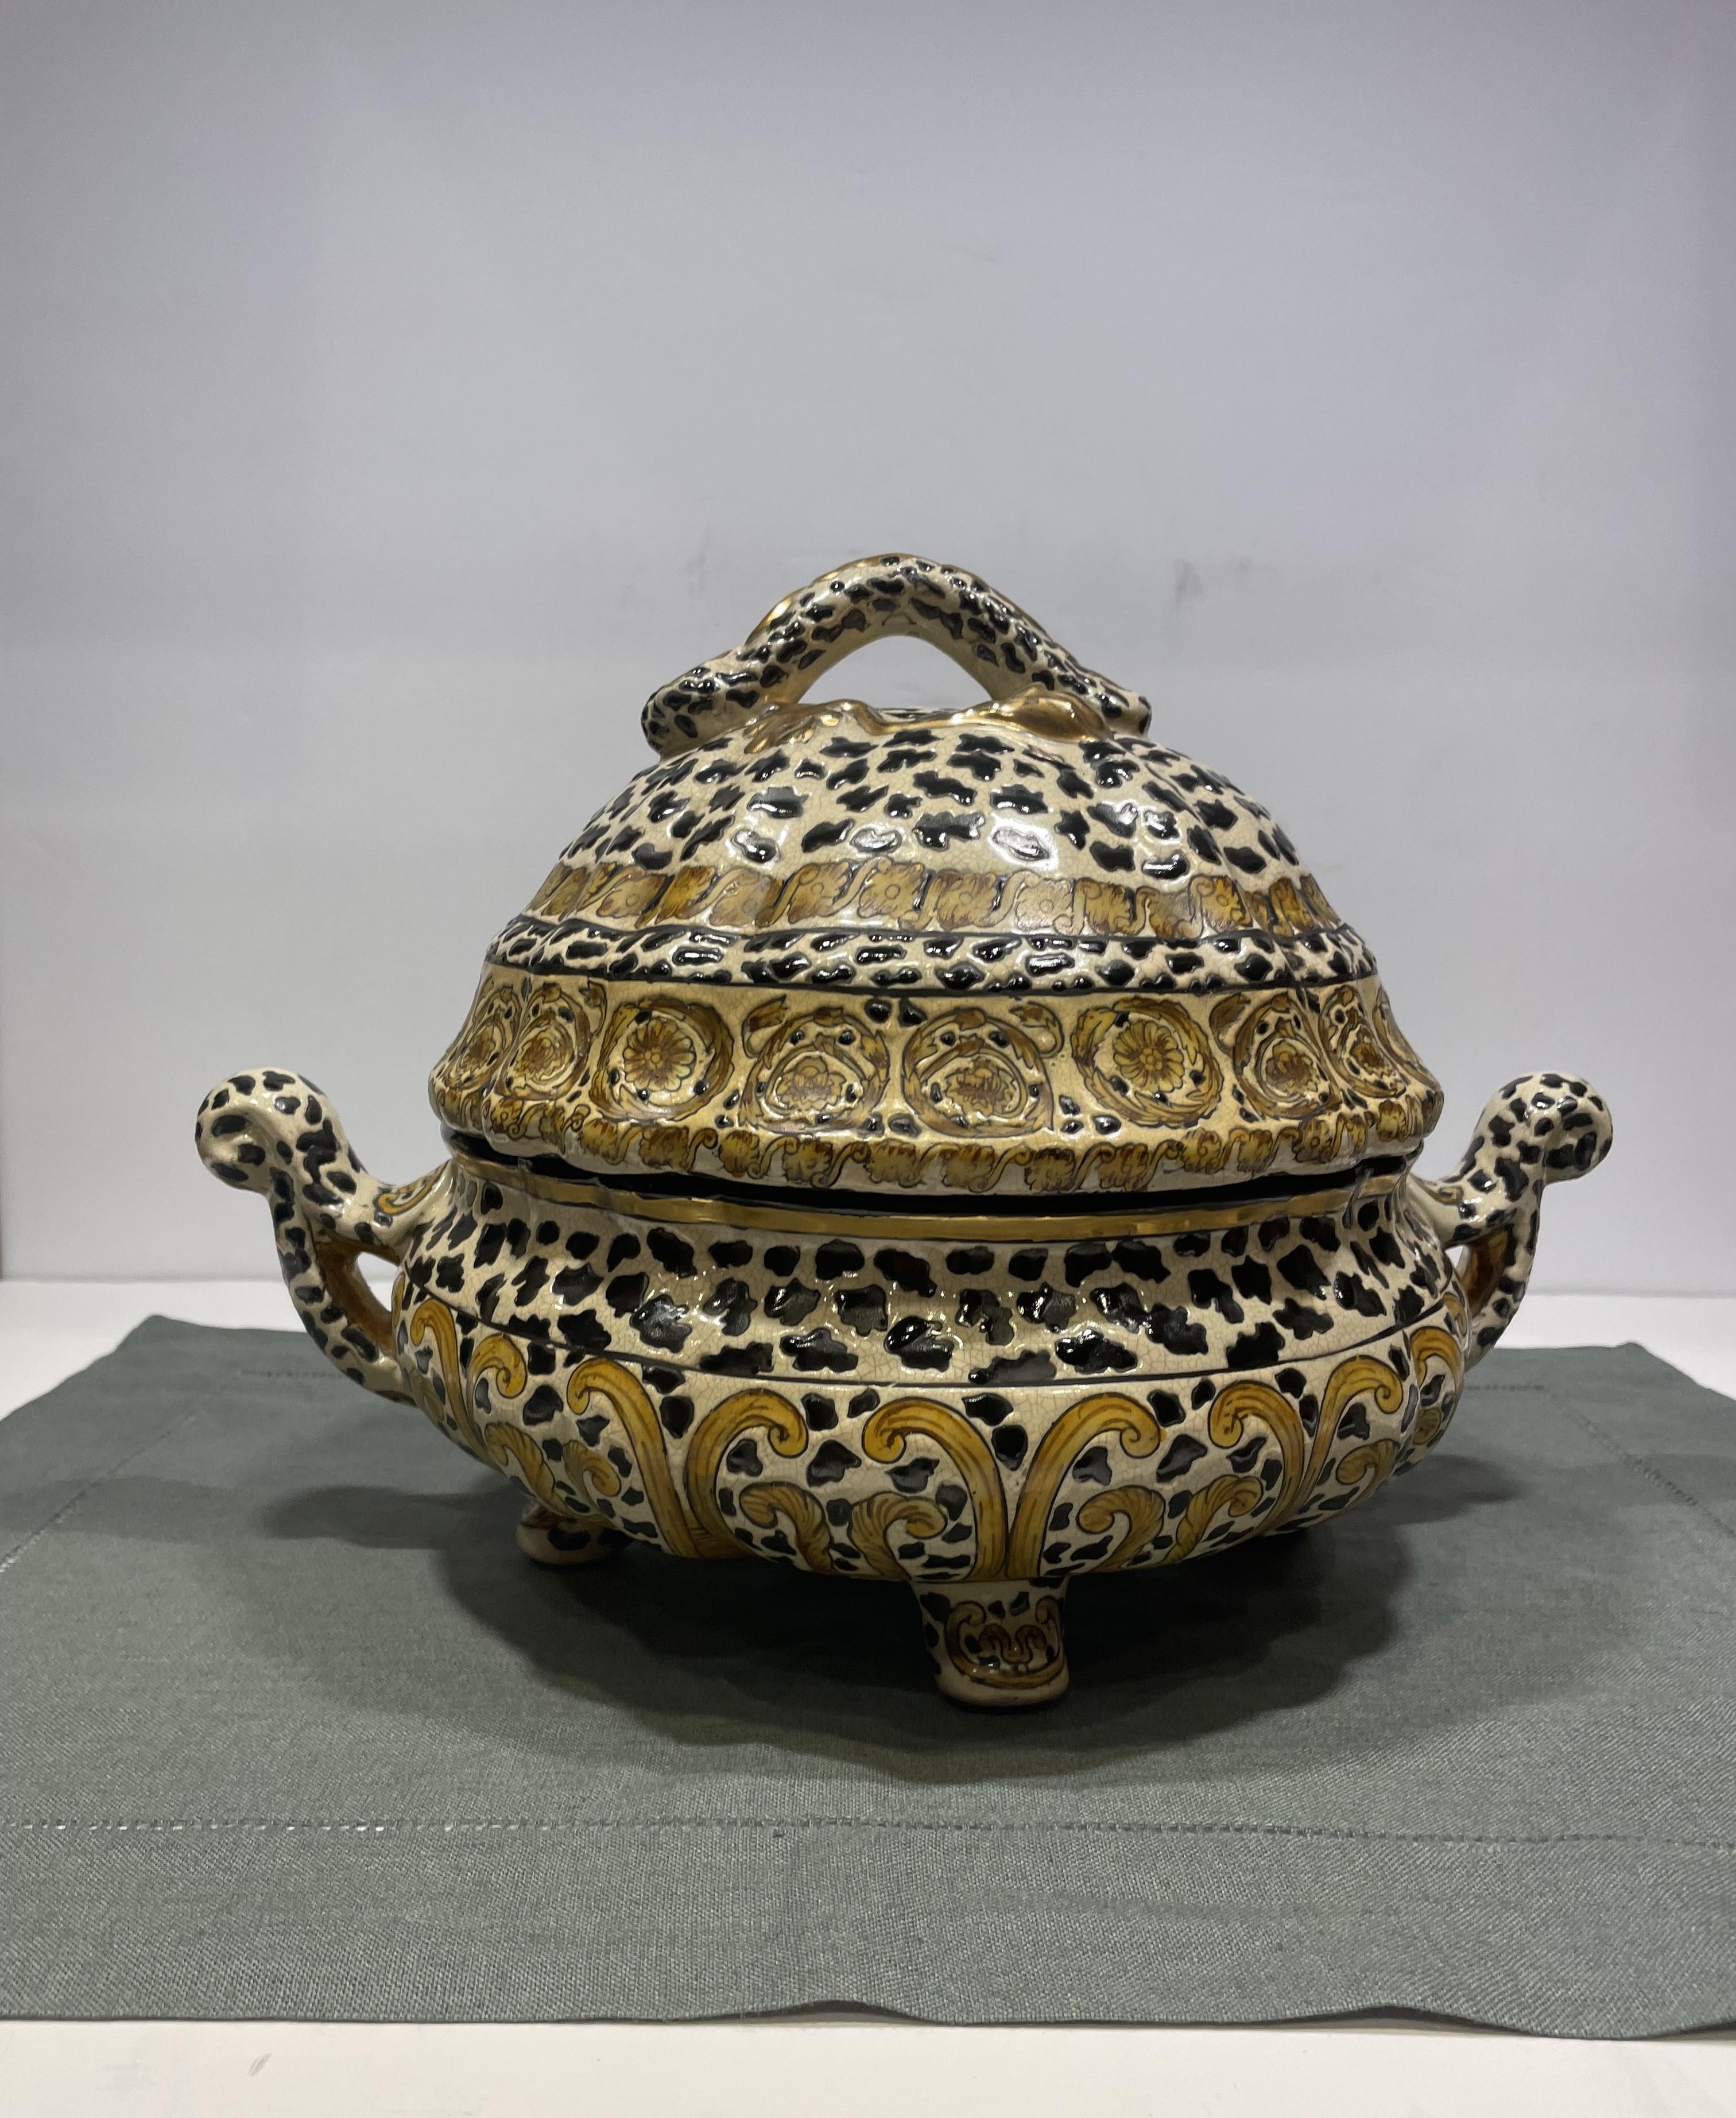 A vintage Chinese decorative tureen that's very 'of the moment' with it's animal motif in browns, blacks, creams and gold. A stunning and versatile accent piece for any room. A beautiful place to house a collection of anything from wrapped candies